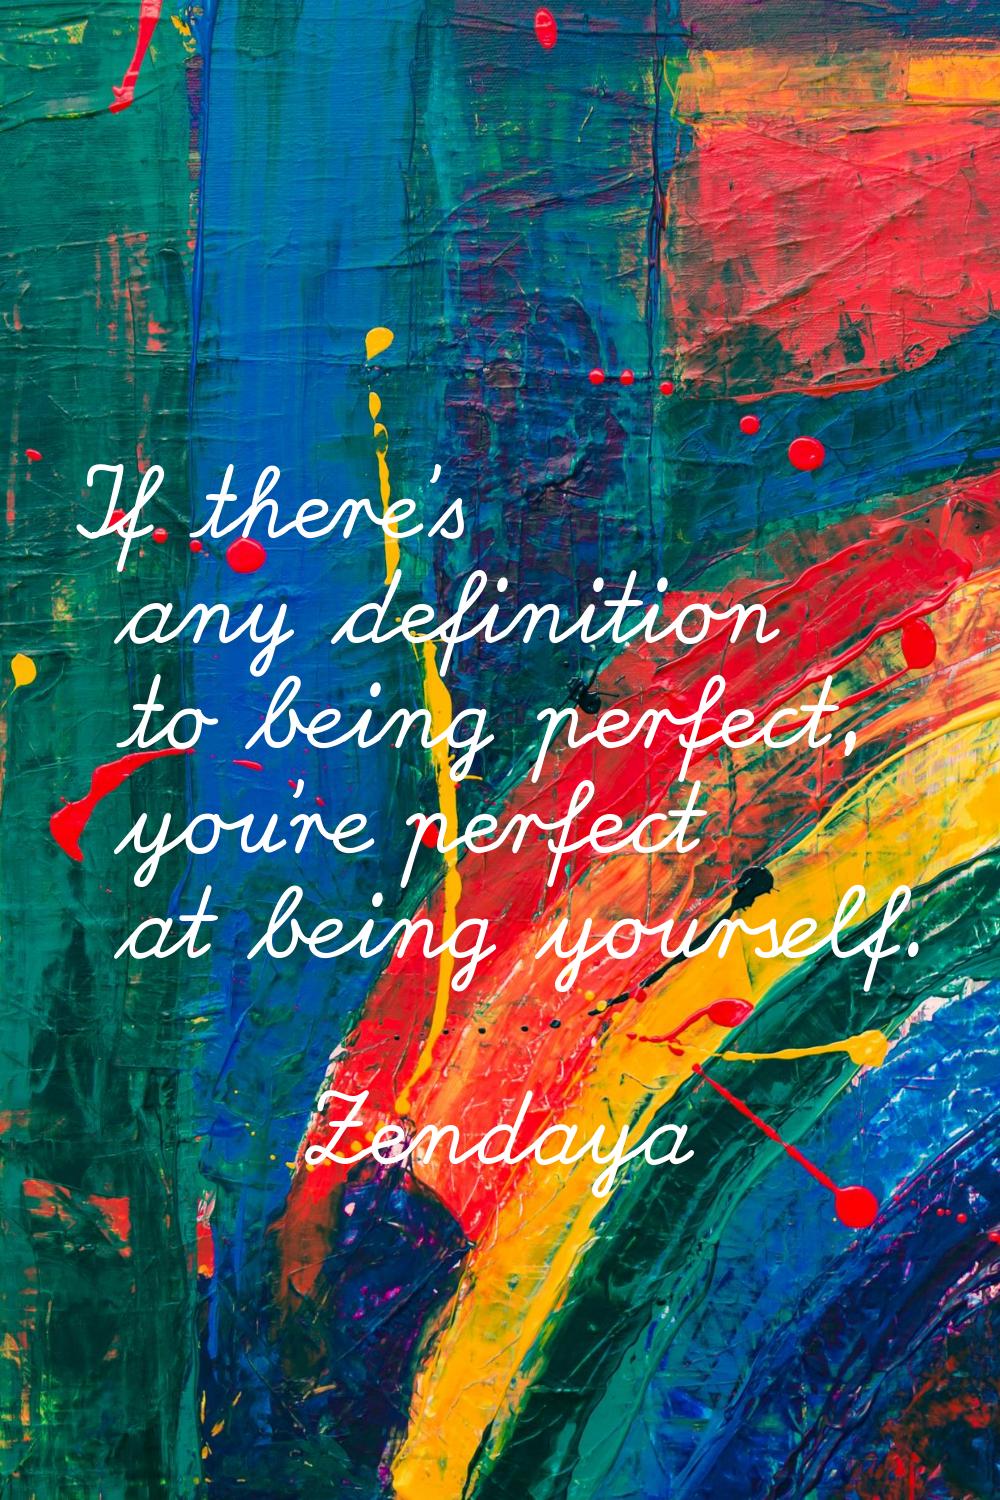 If there's any definition to being perfect, you're perfect at being yourself.